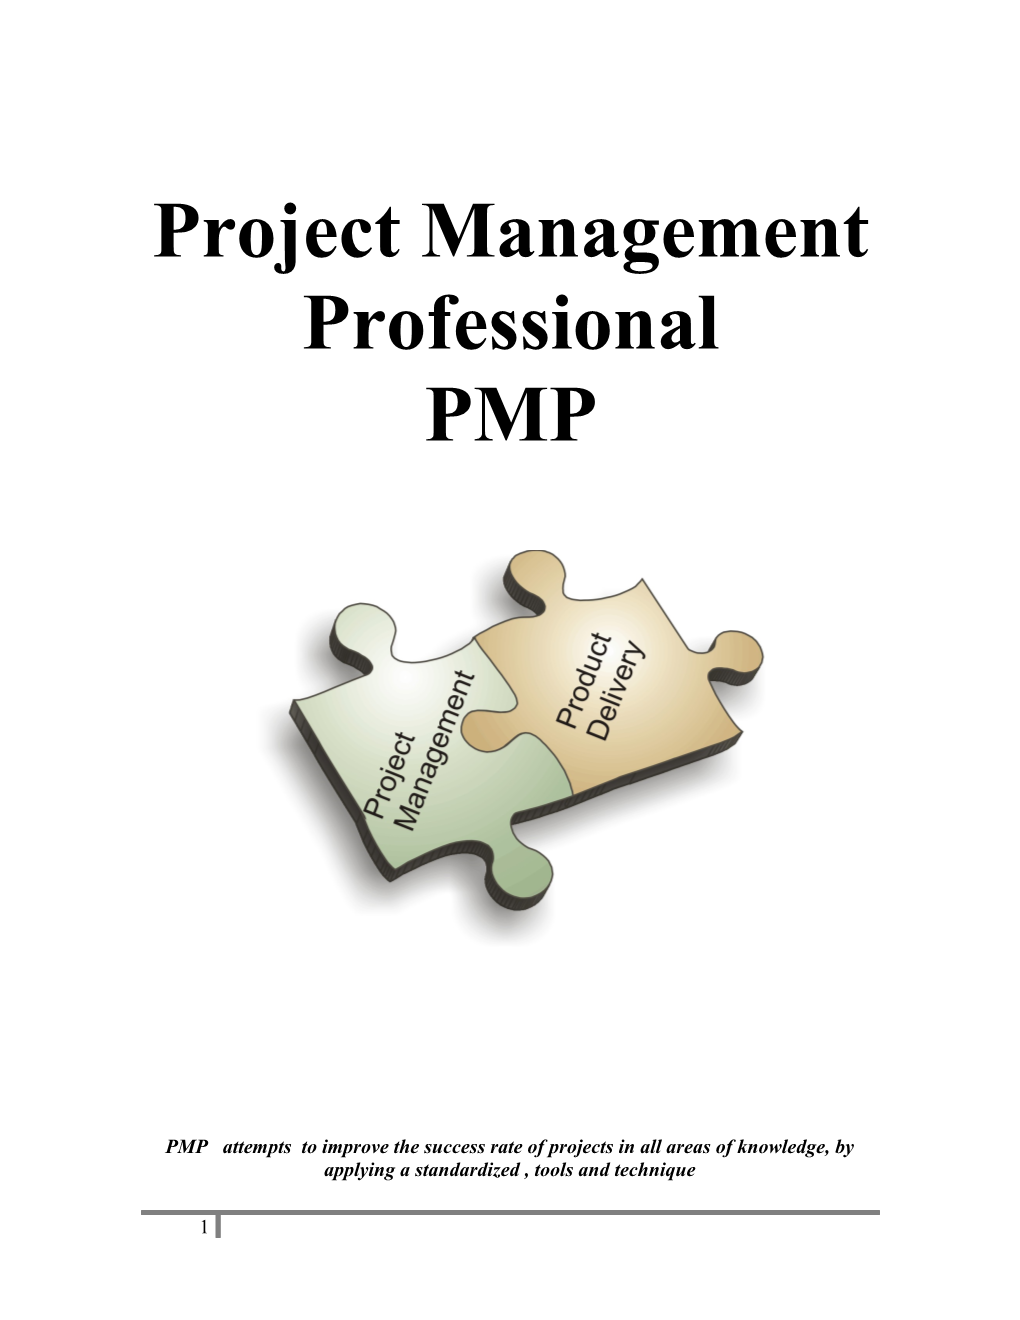 Project Management Framework and Initiating the Project